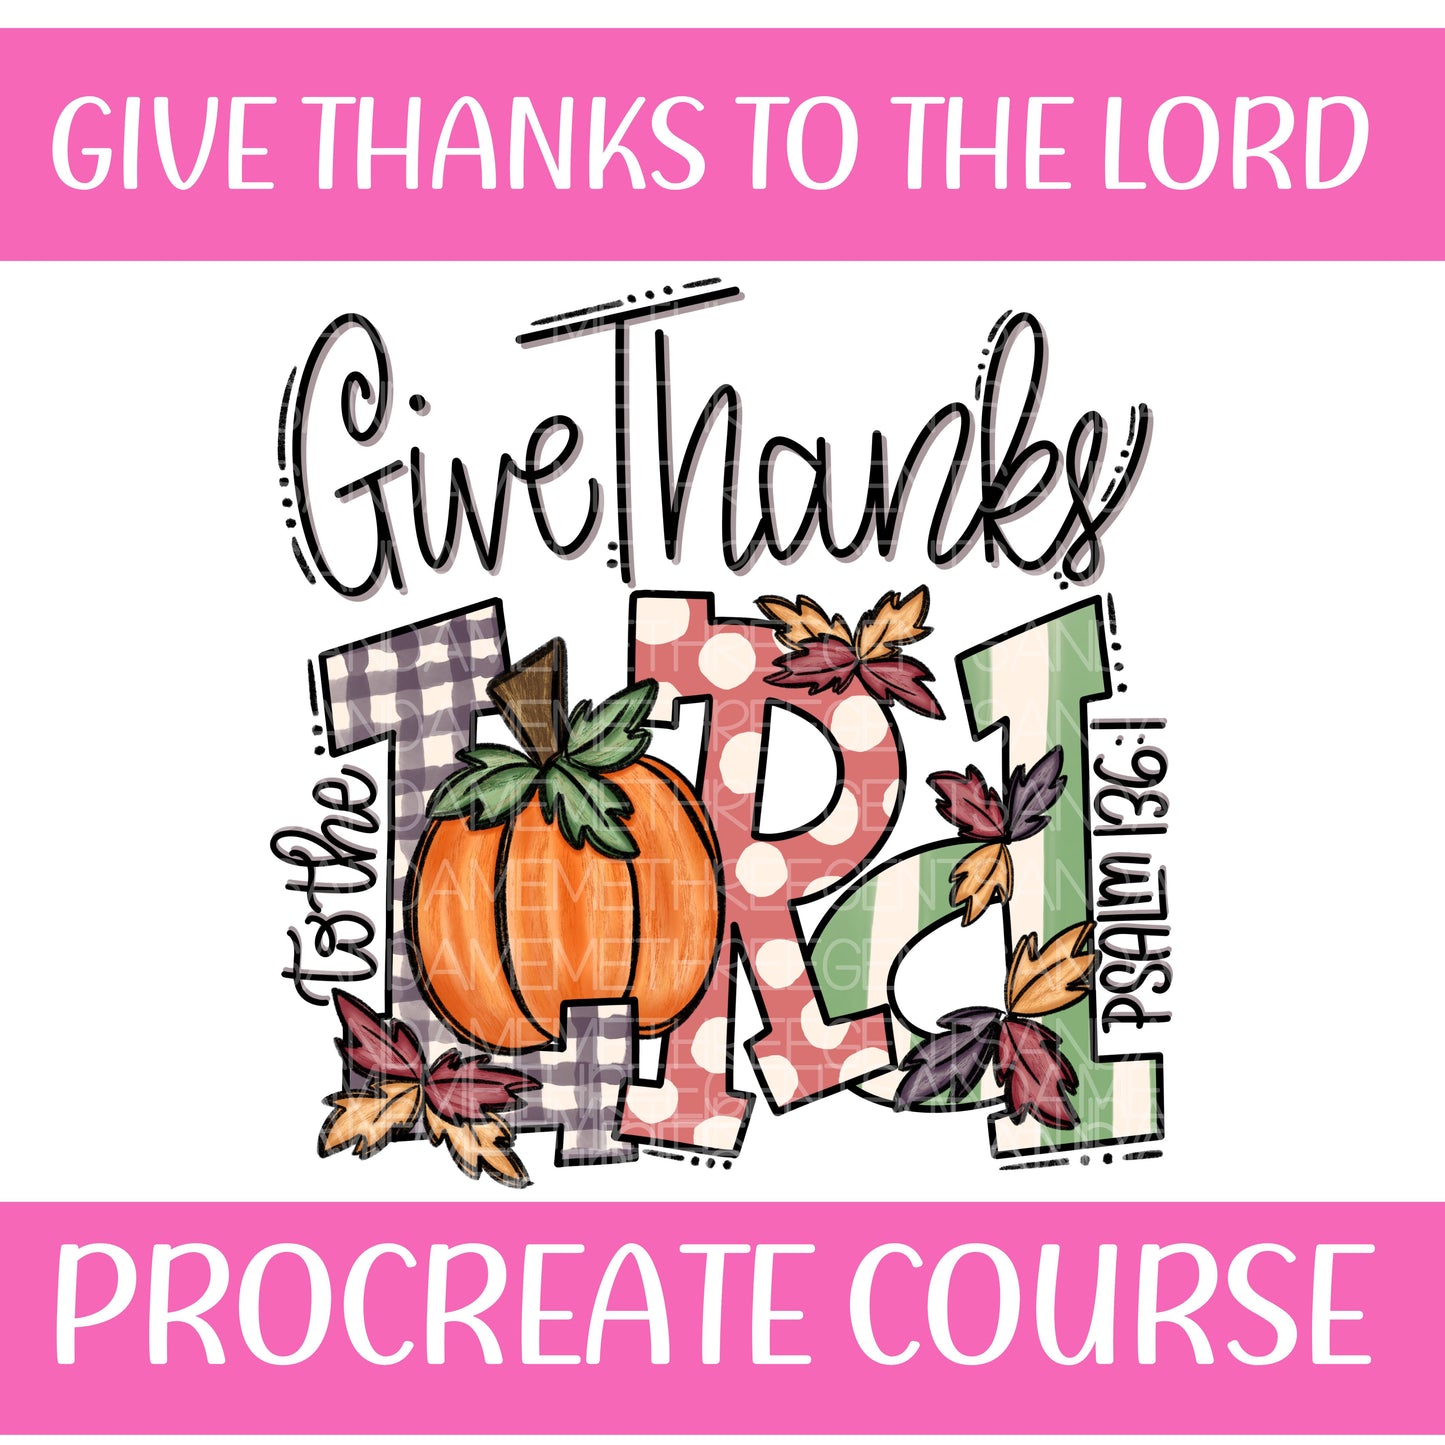 GIVE THANKS TO THE LORD PROCREATE COURSE